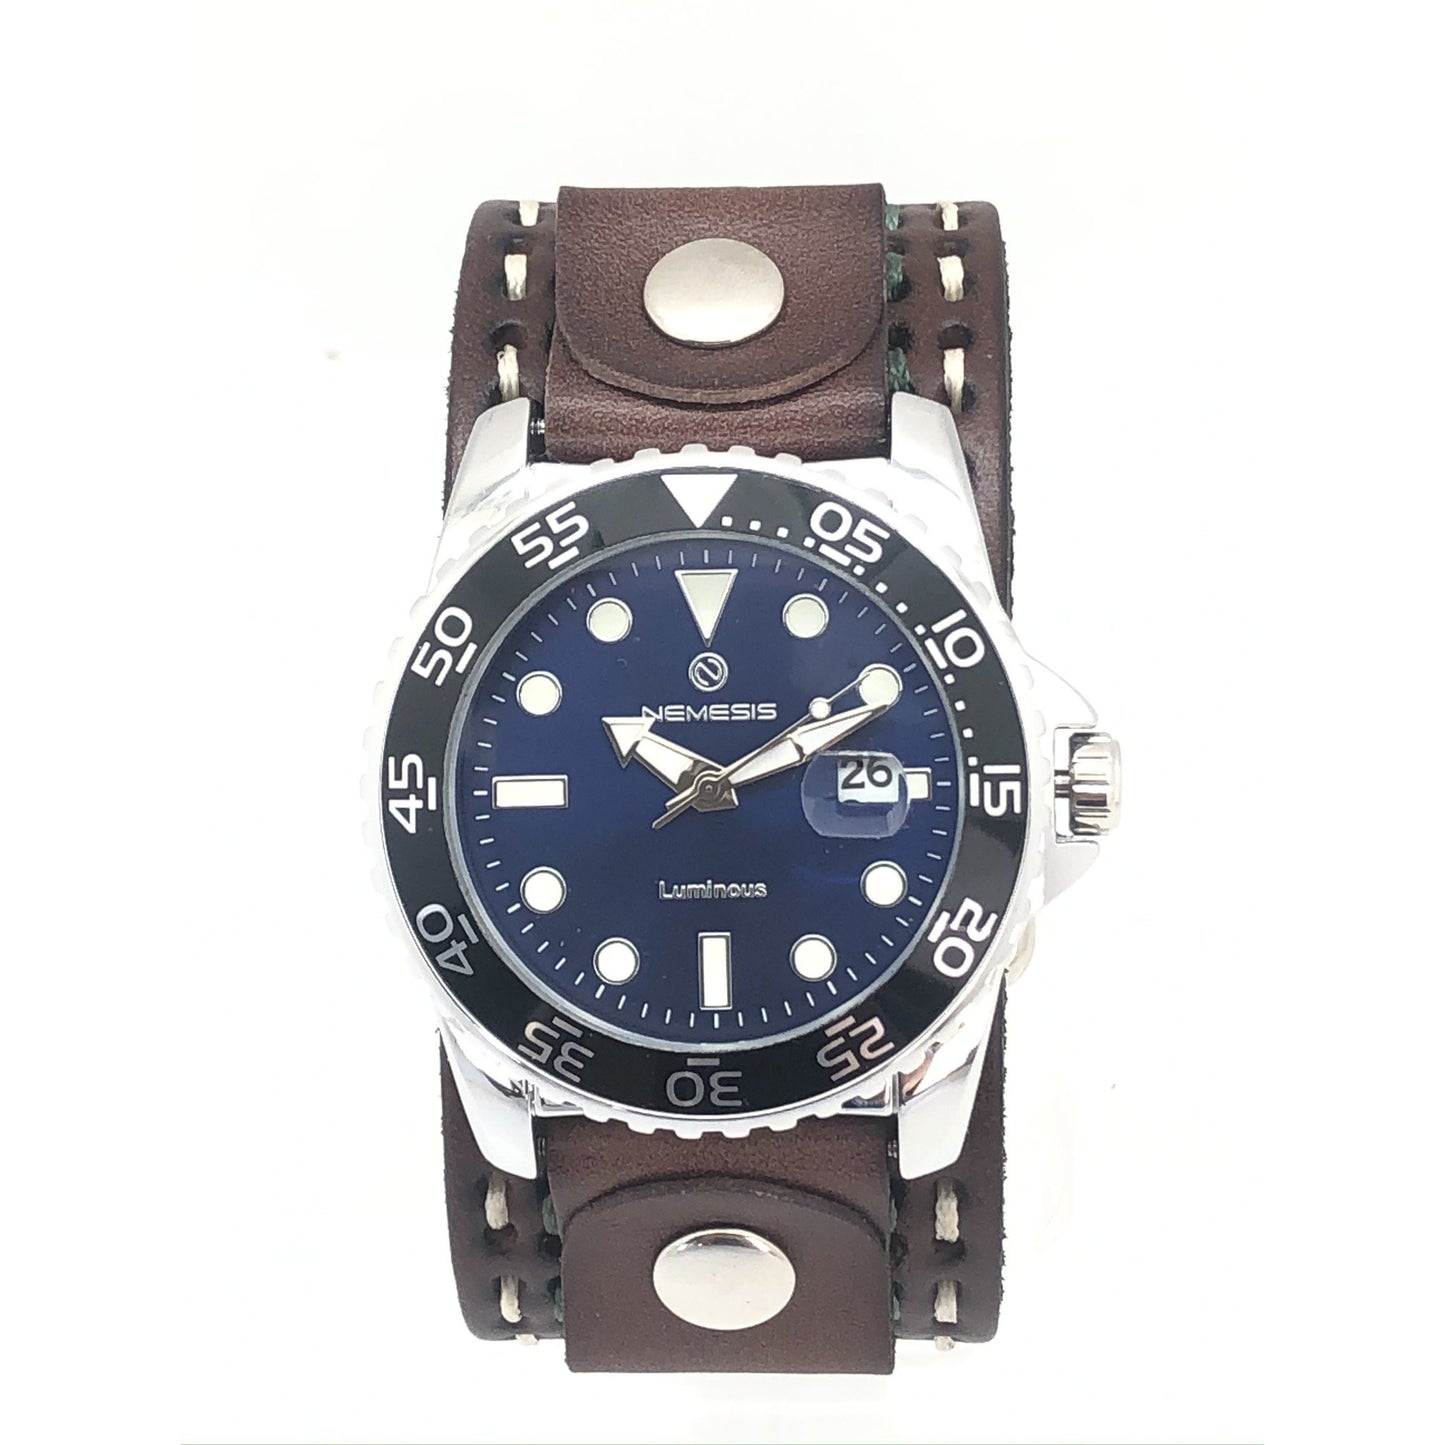 Moonwalker Luminous Blue Diver with White Stitched Brown Leather Cuff